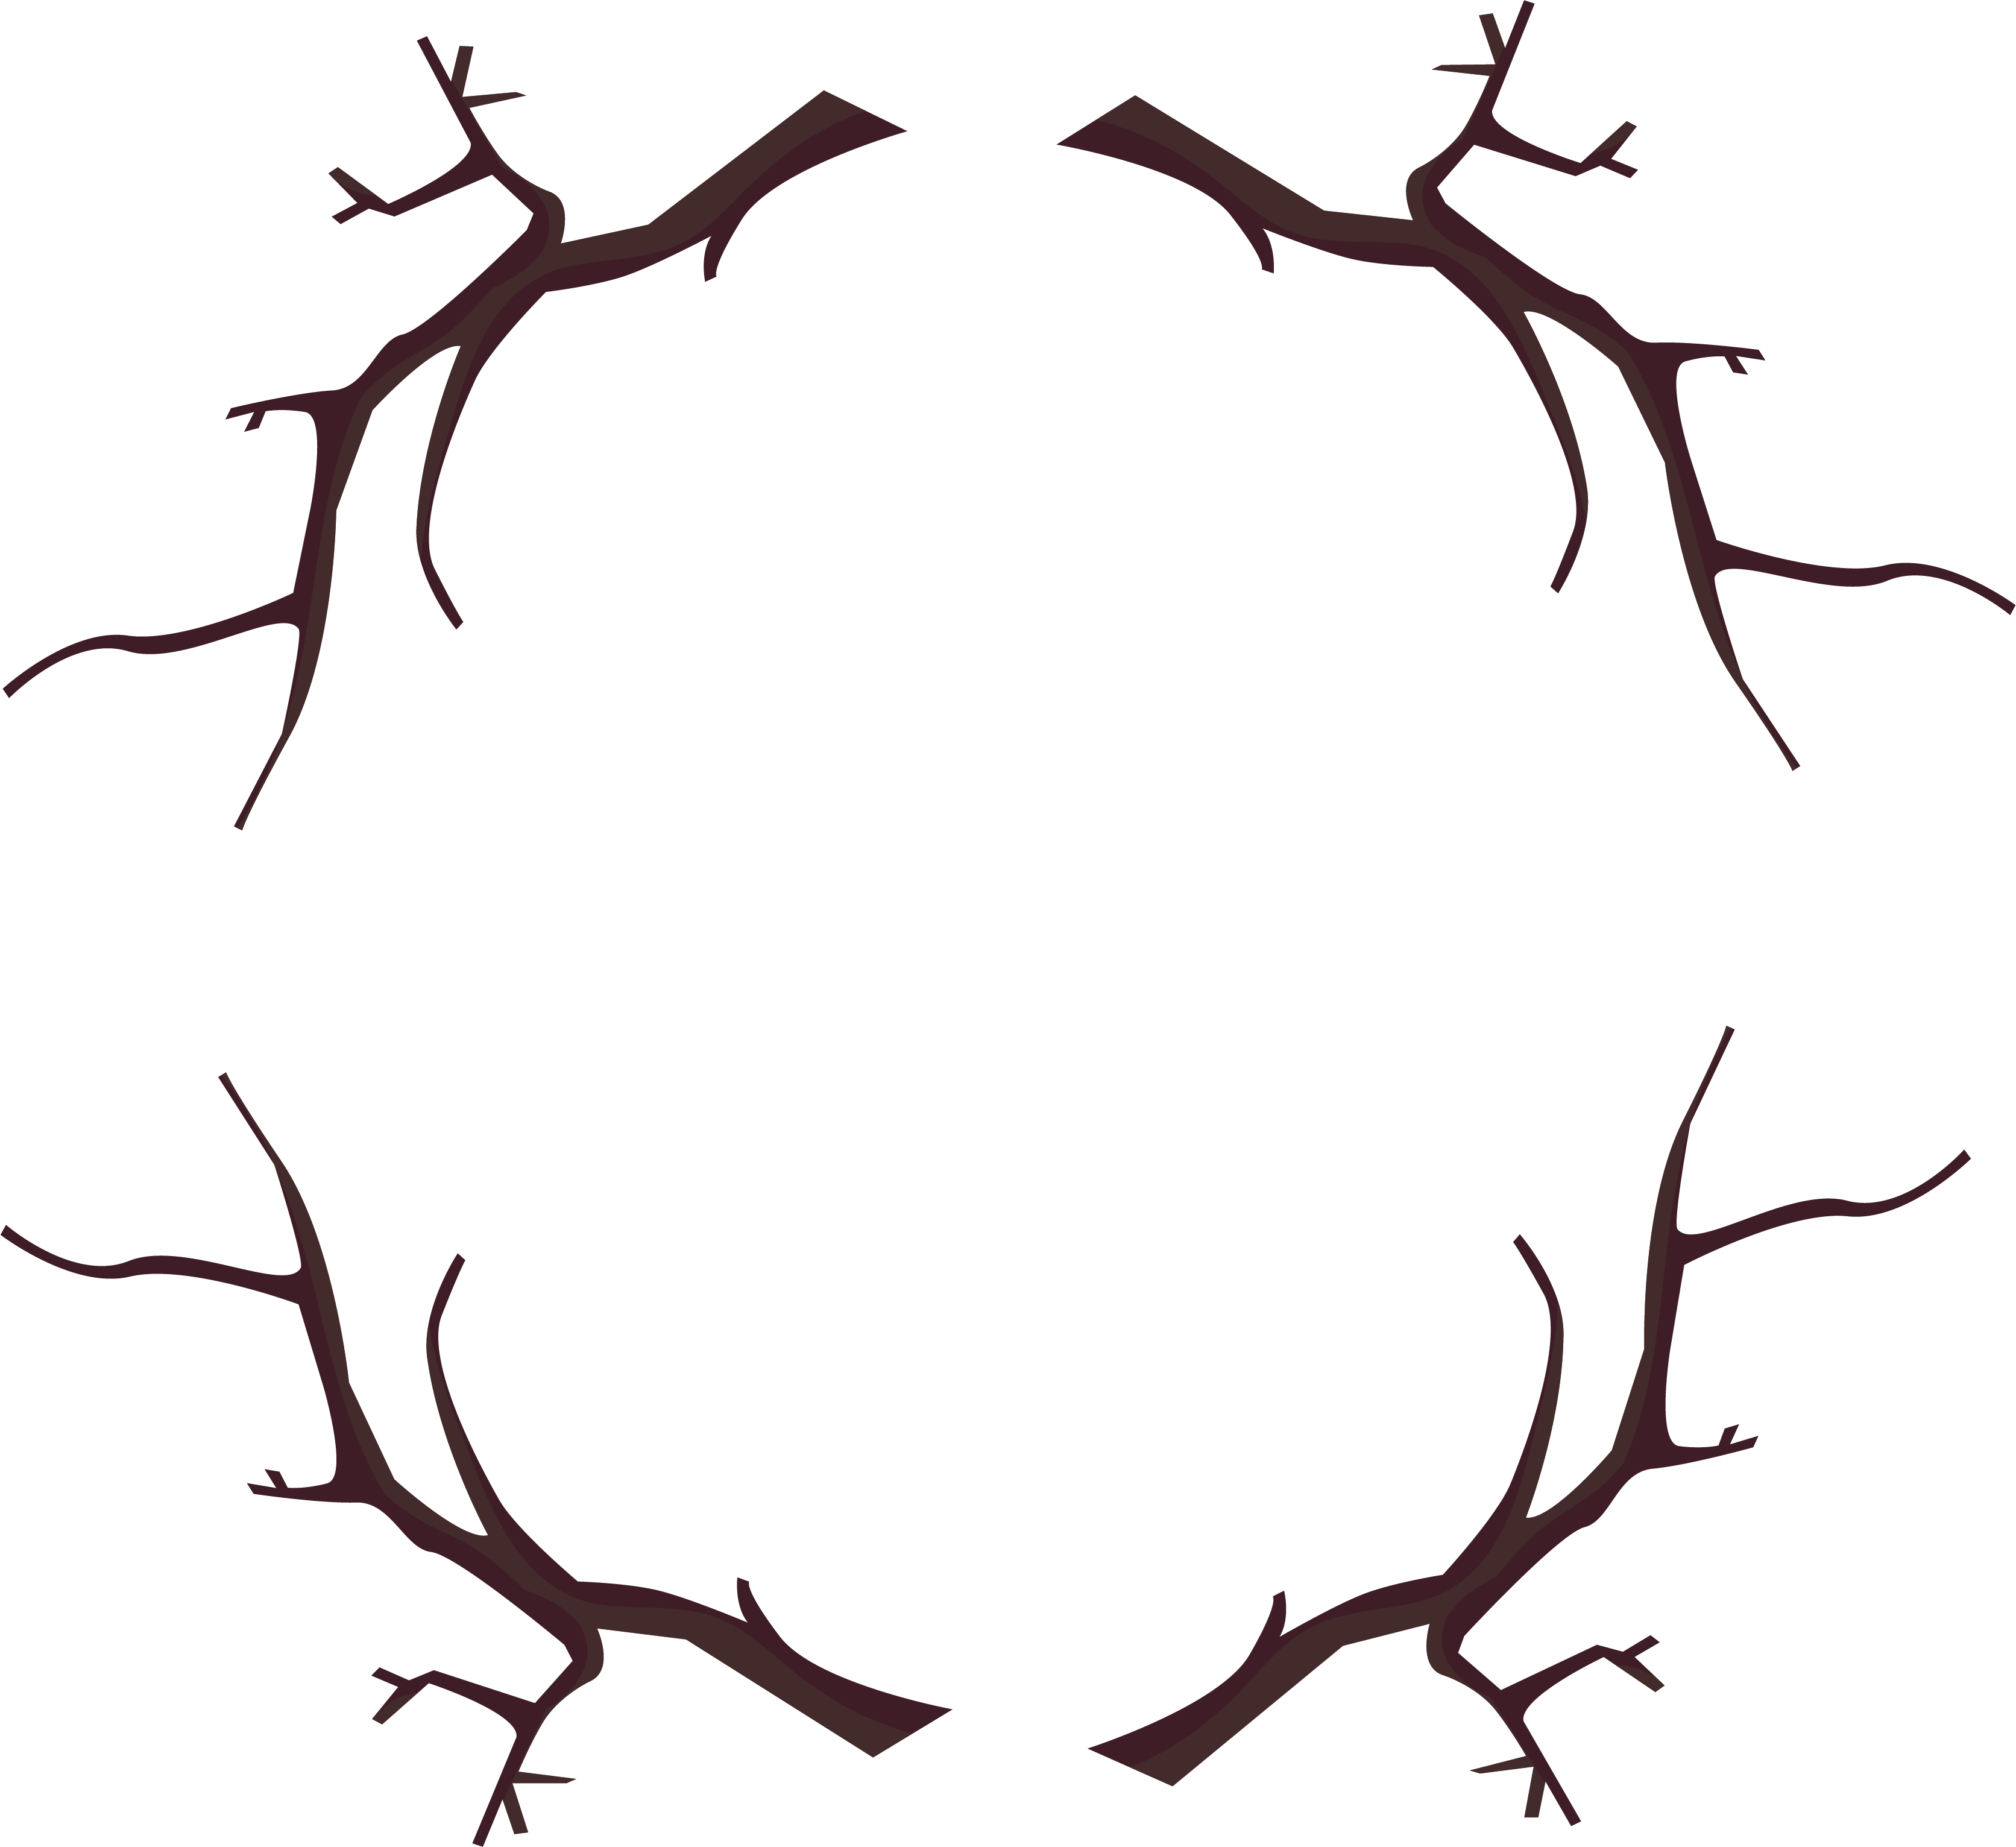 A Frame Of Branches On A Black Background